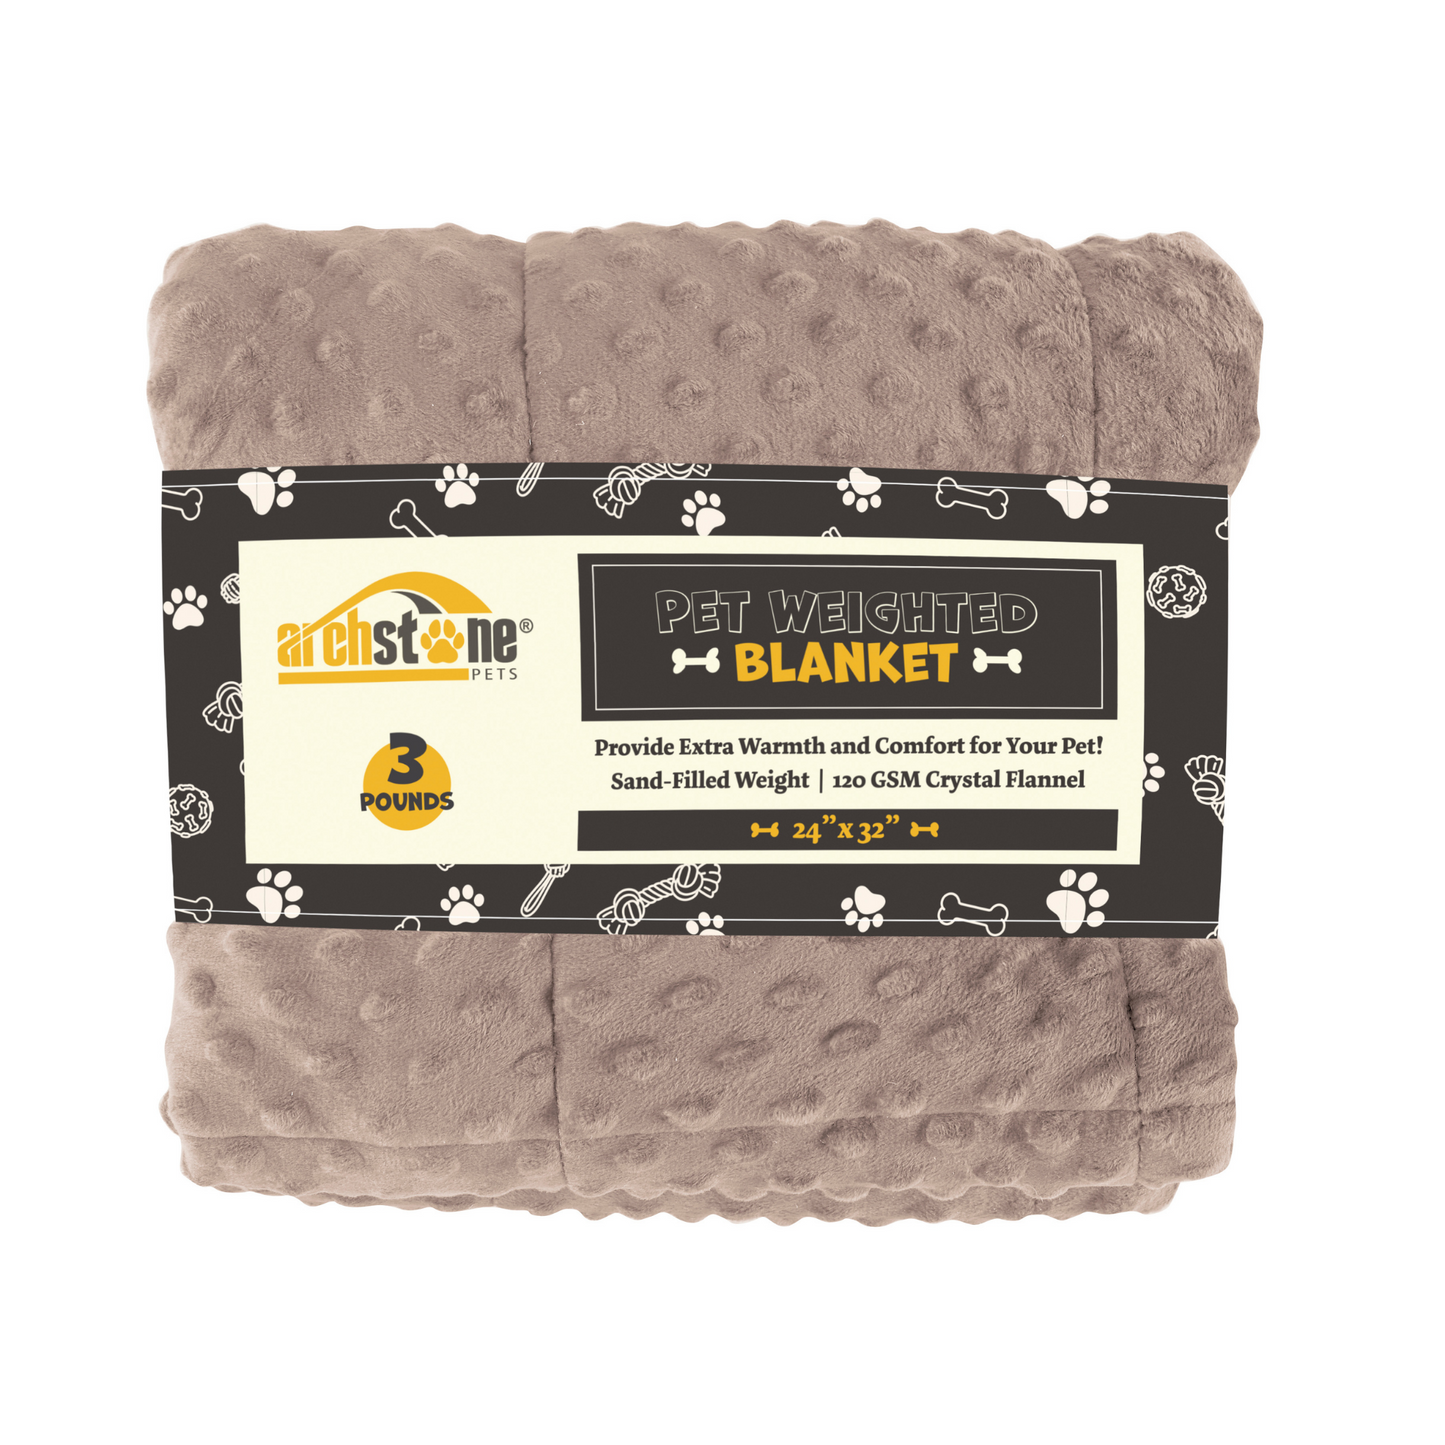 Pet Weighted Blanket - 24 x 32", 3 lbs.